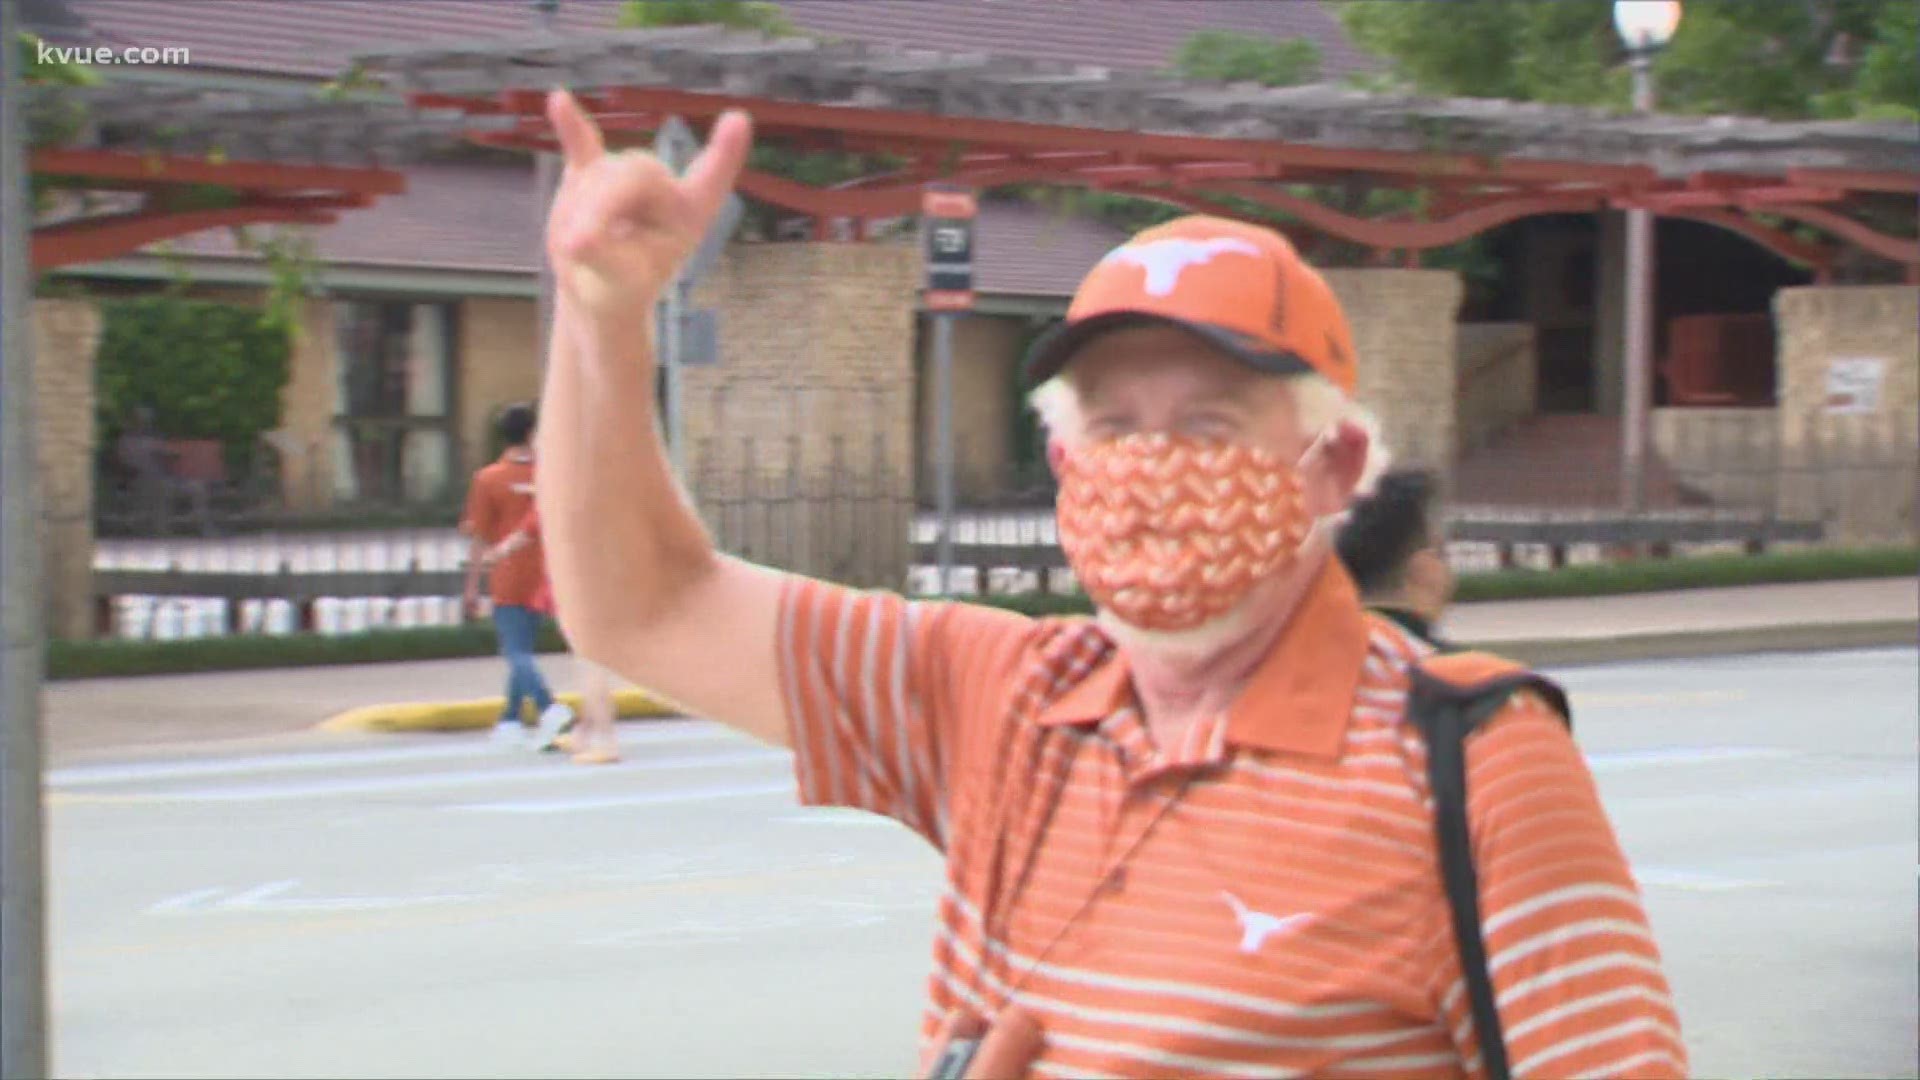 UT Longhorn football fans adjusted to changes at the team's first home game of the season due to COVID-19. Everyone KVUE spoke with was just happy to be there.